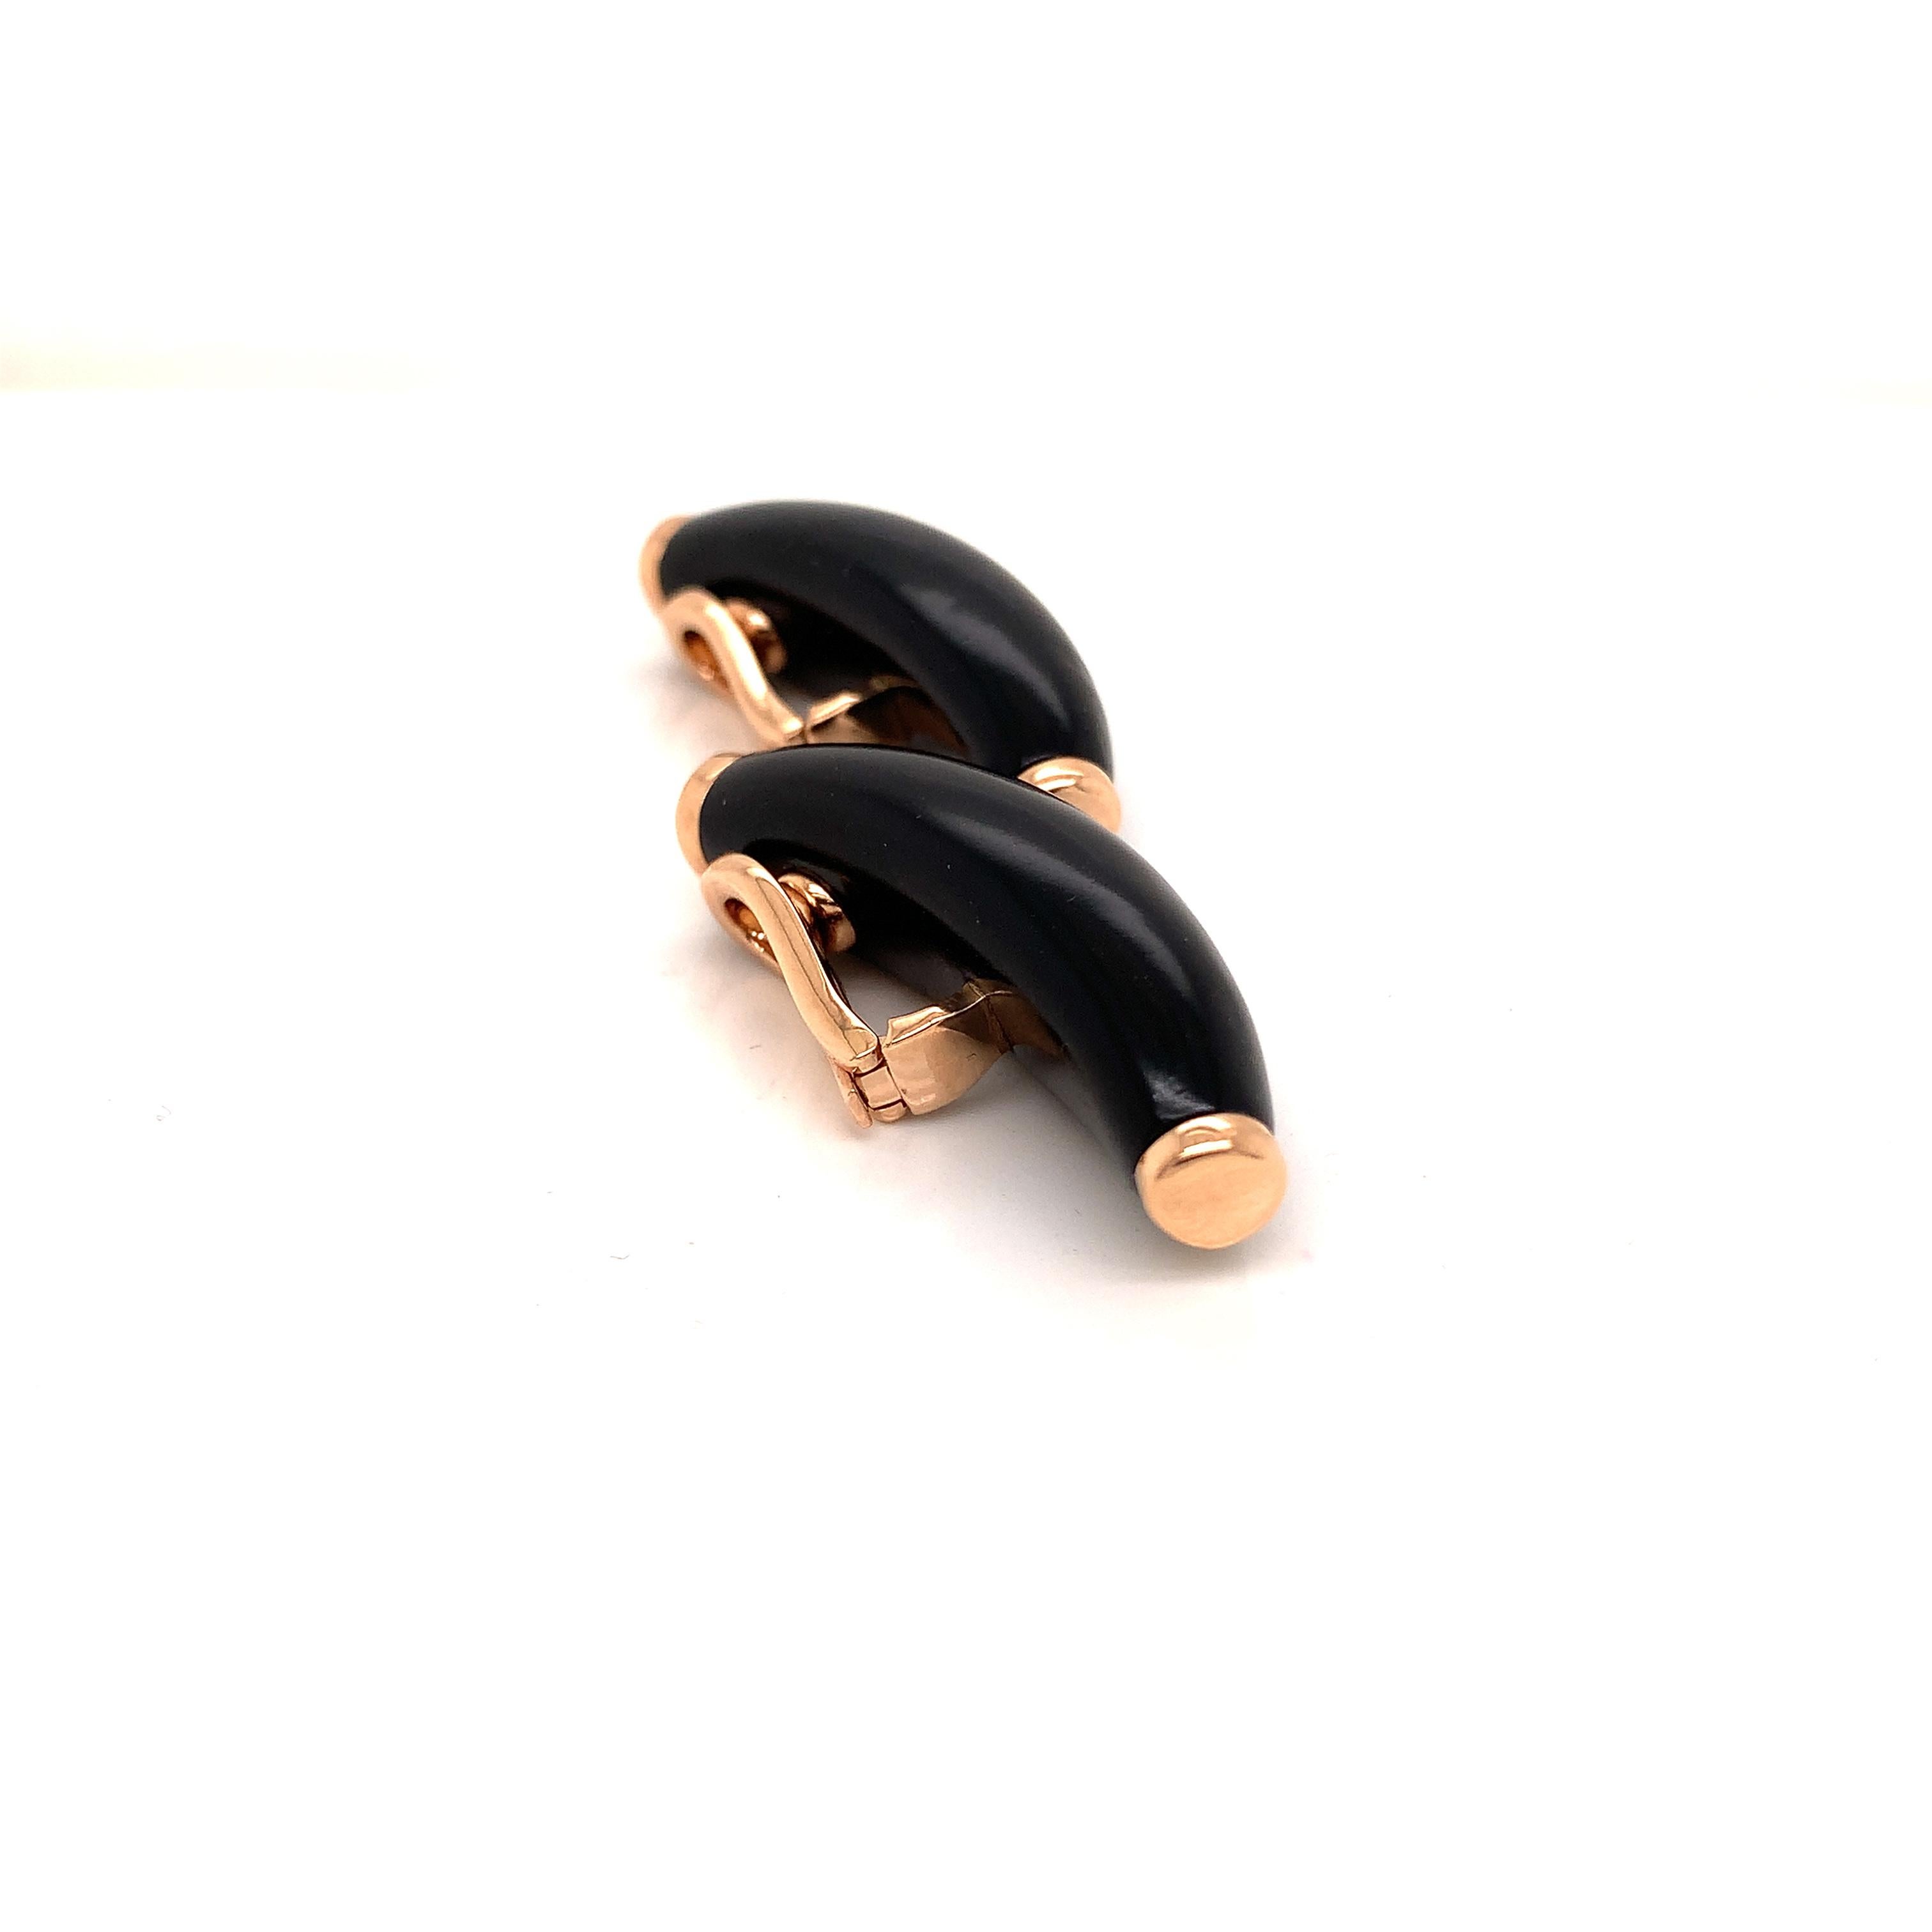 18 Karat Rose Gold and Black Bronze Modern  Earrings
New Dolce Vita Collection by Garavelli
Dimension mm 35 x 12
18kt GOLD  : gr : 10
BRONZE g: 14
Made in Valenza, Italy
They can come  in different colors as shown in the images and matching